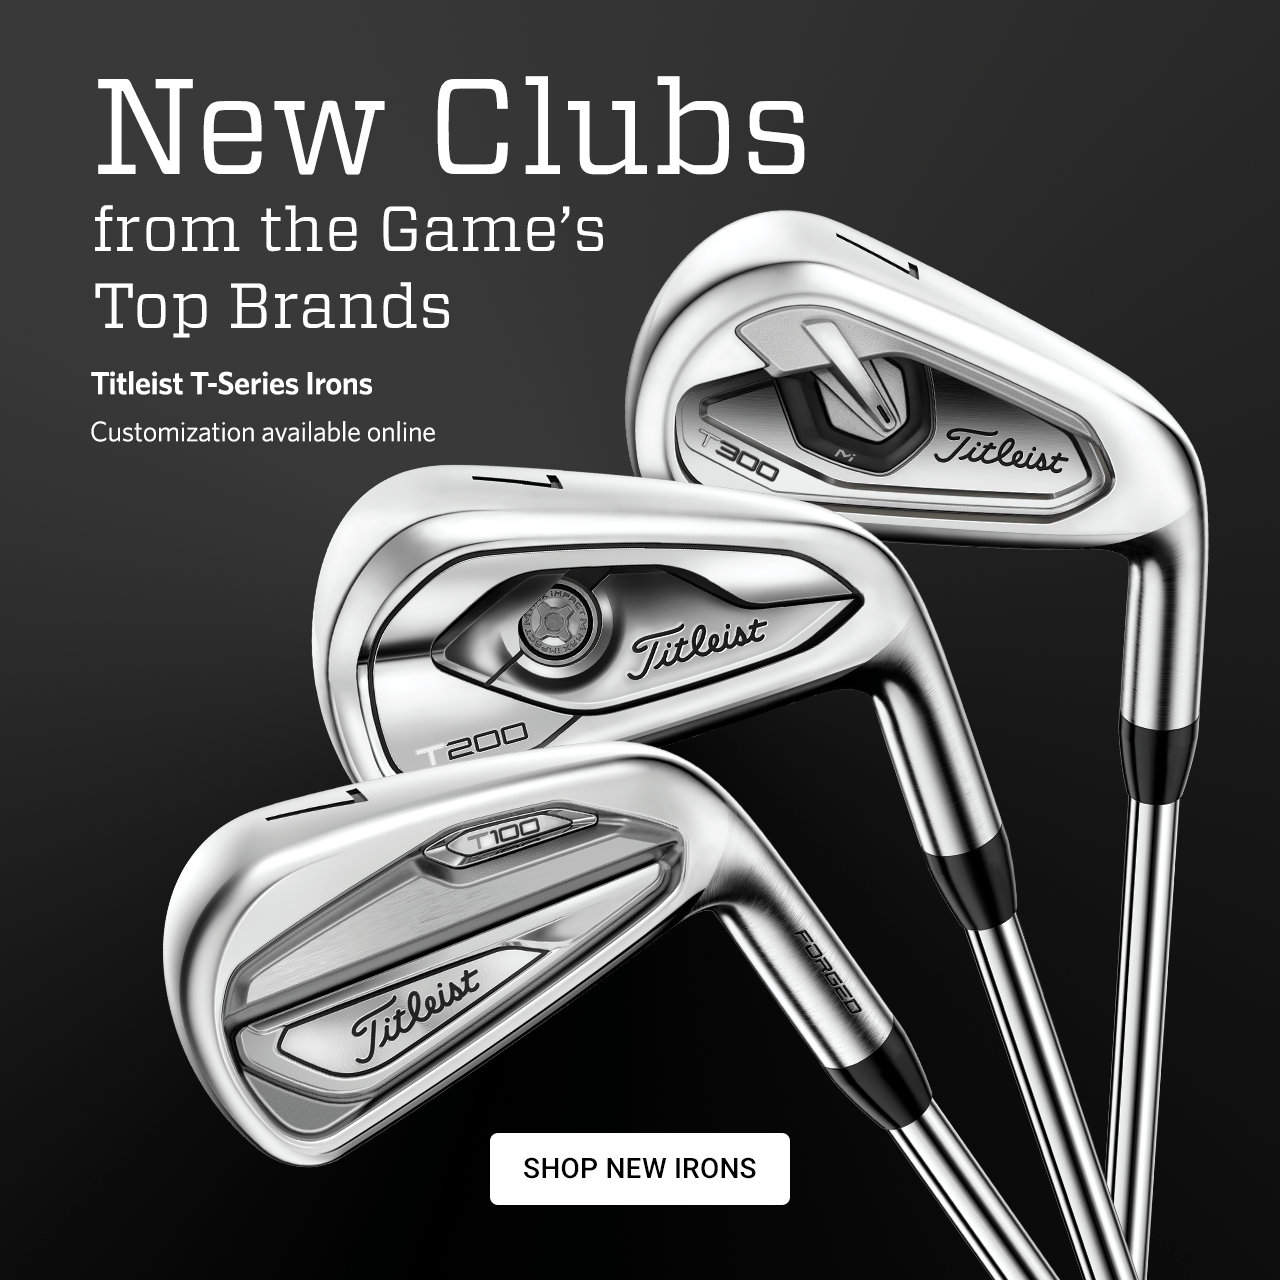 New Clubs From the Game's Top Brands. Titleist T-Series Irons. Customization available online. Shop New Irons.